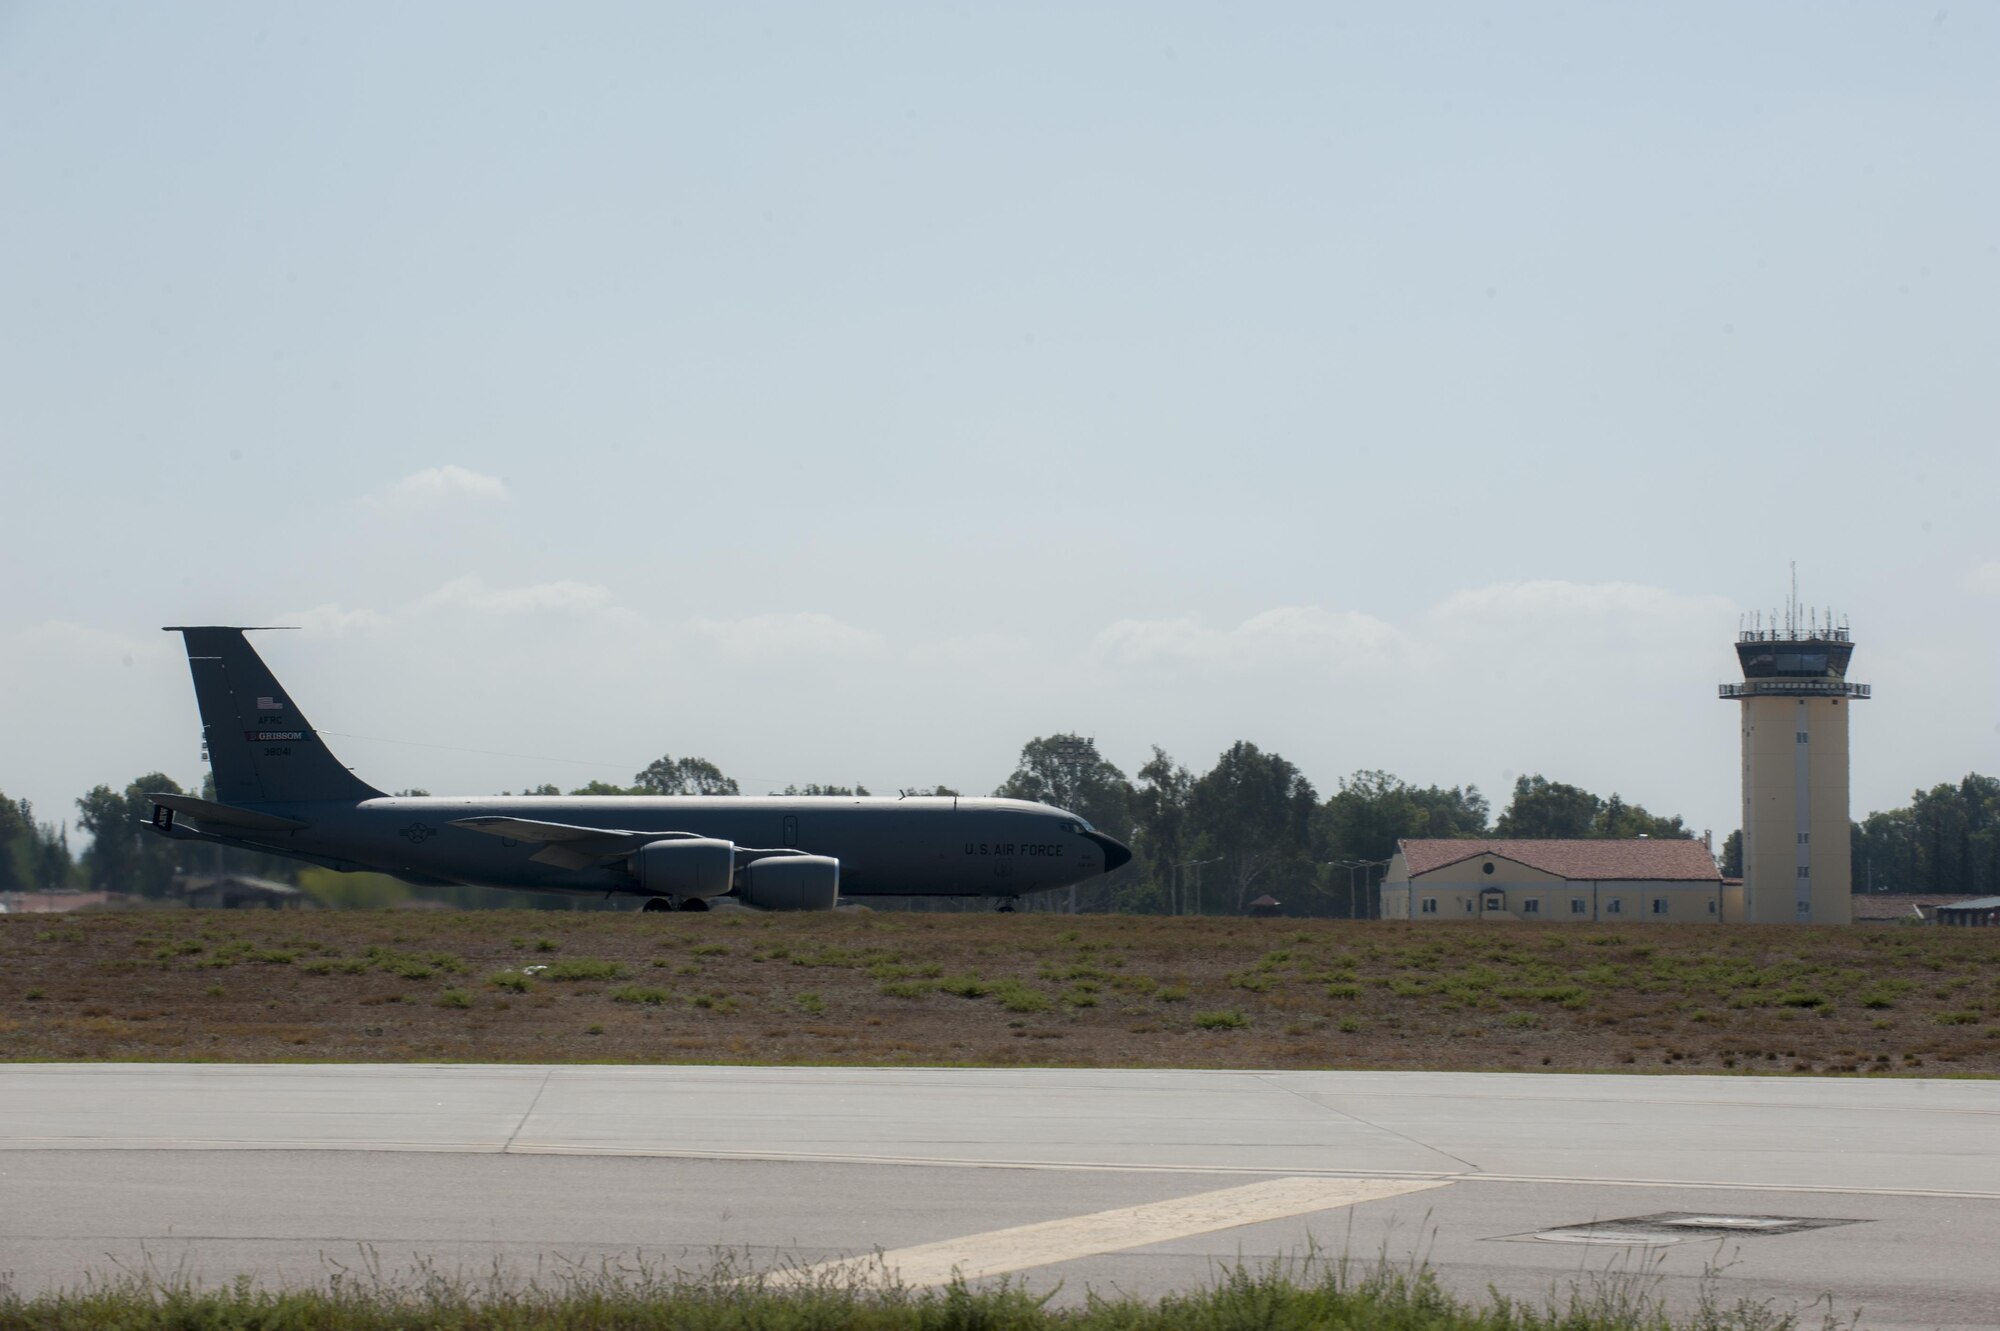 A KC-135 Stratotanker sits on the runway preparing for takeoff Sept. 19, 2016, at Incirlik Air Base, Turkey. KC-135 Stratotankers stationed out of Incirlik Air Base are responsible for aerial refueling of coalition aircraft supporting the Operation INHERENT RESOLVE mission. (U.S. Air Force photo by Staff Sgt. Jack Sanders)